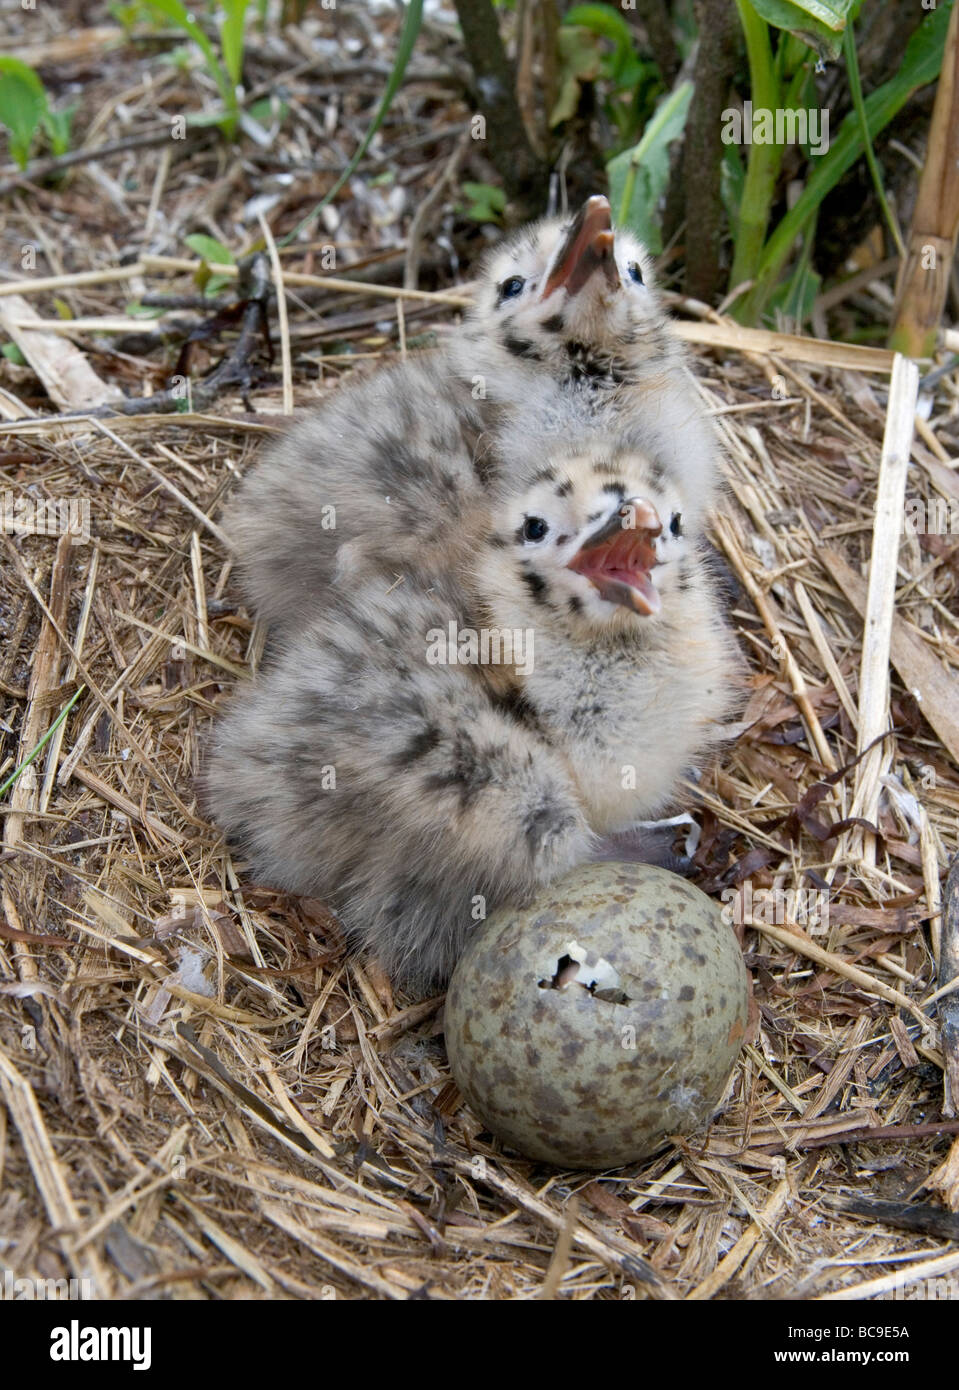 two downy Herring Gull chicks and an egg in the nest The egg is being opened from the inside by the emerging chick Stock Photo